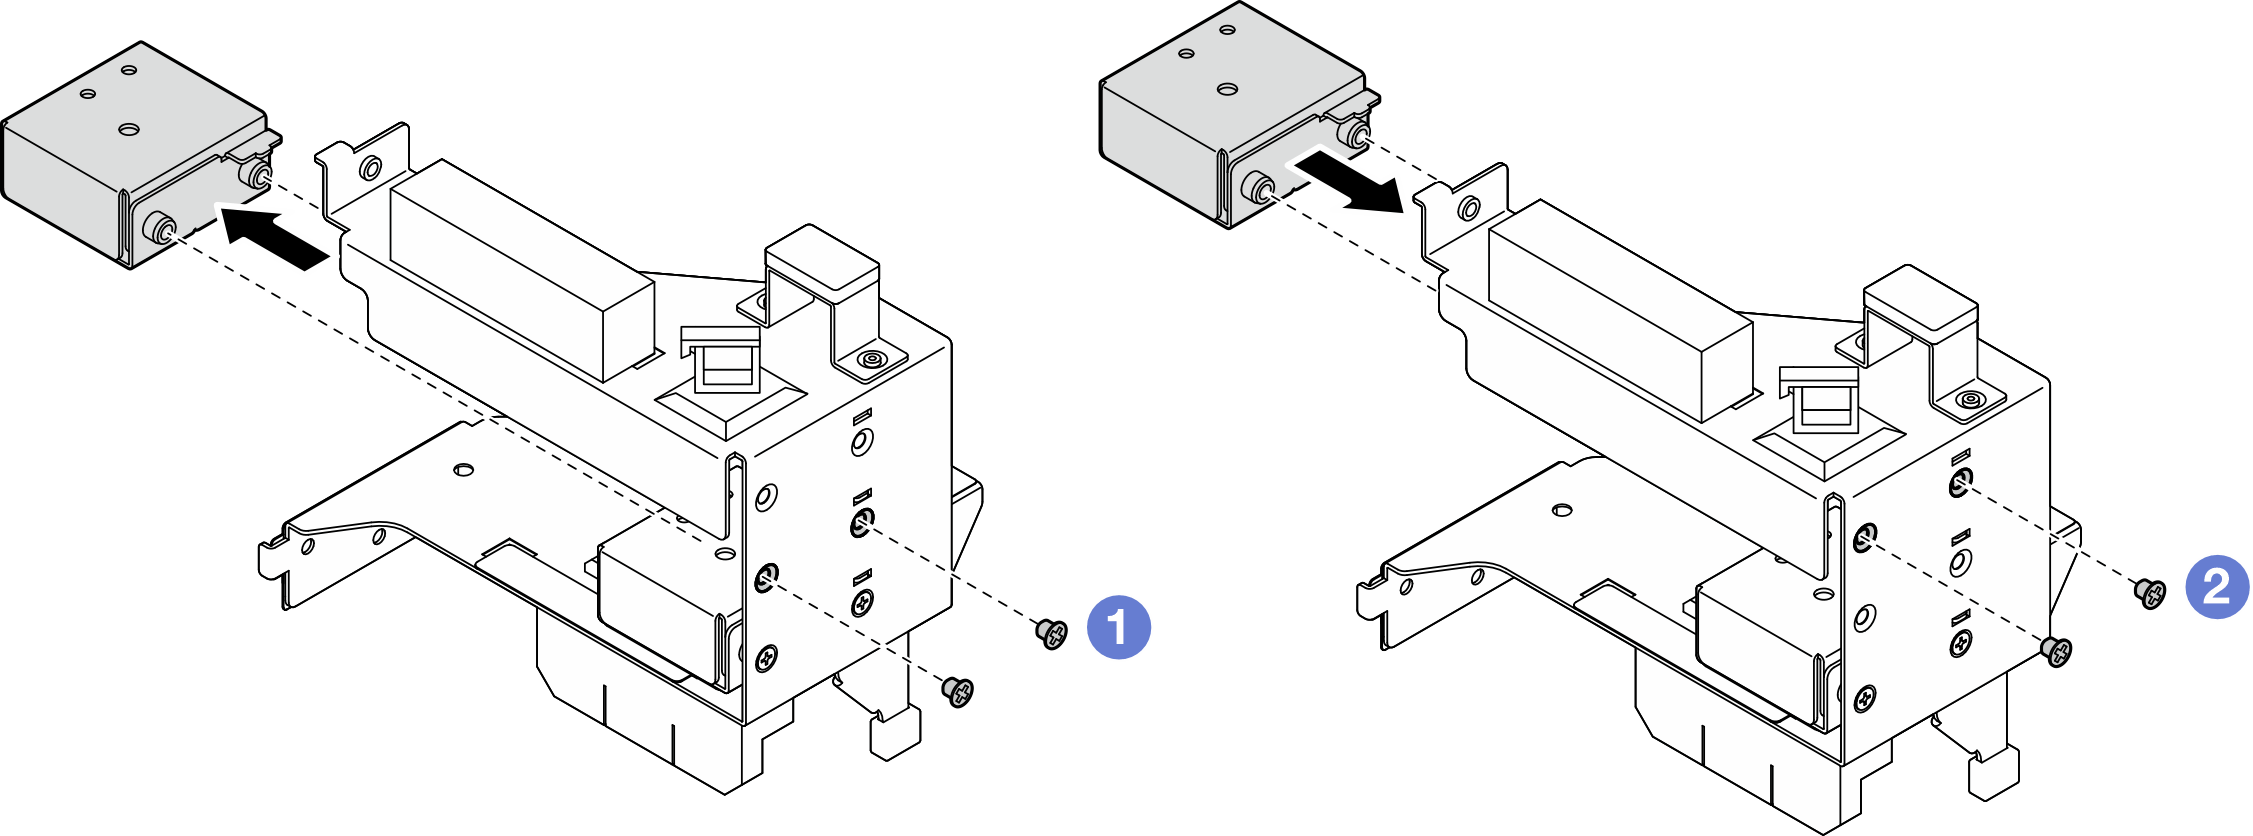 Adjusting the PCIe half-height support brace position